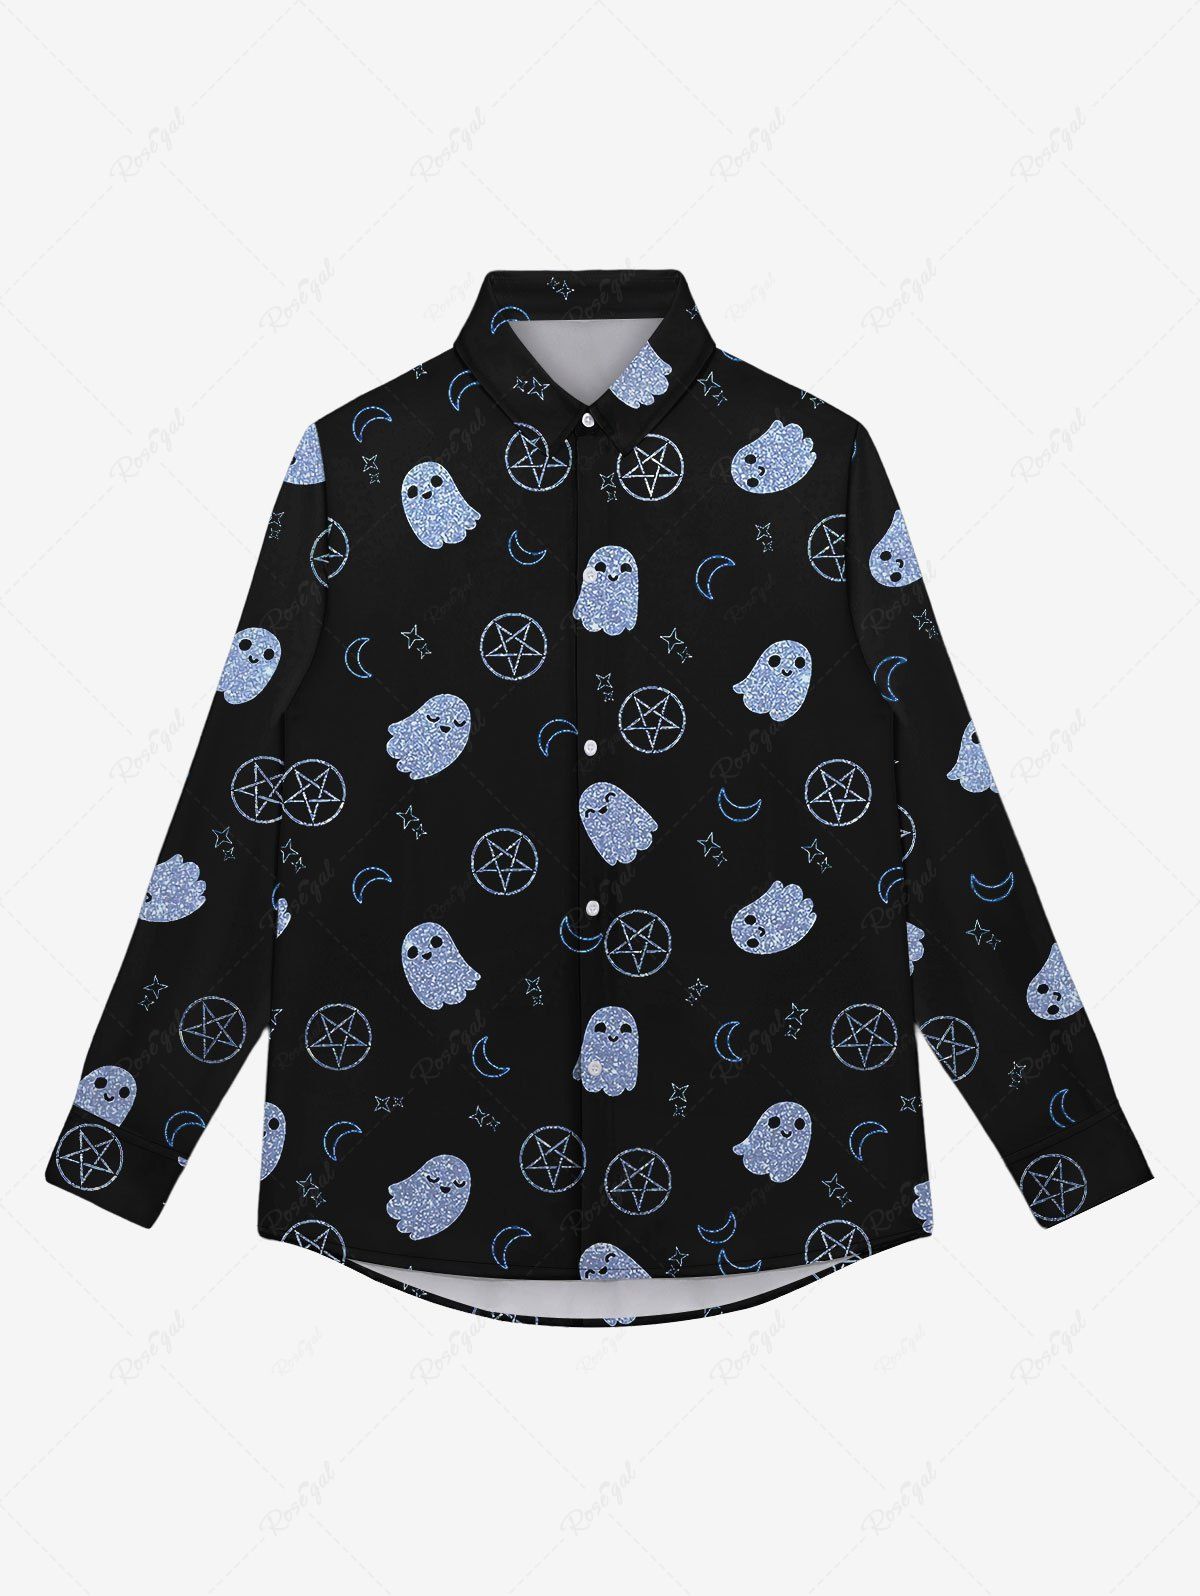 Trendy Gothic Turn-down Collar Cute Ghost Moon Star Printed Buttons Shirt For Men  